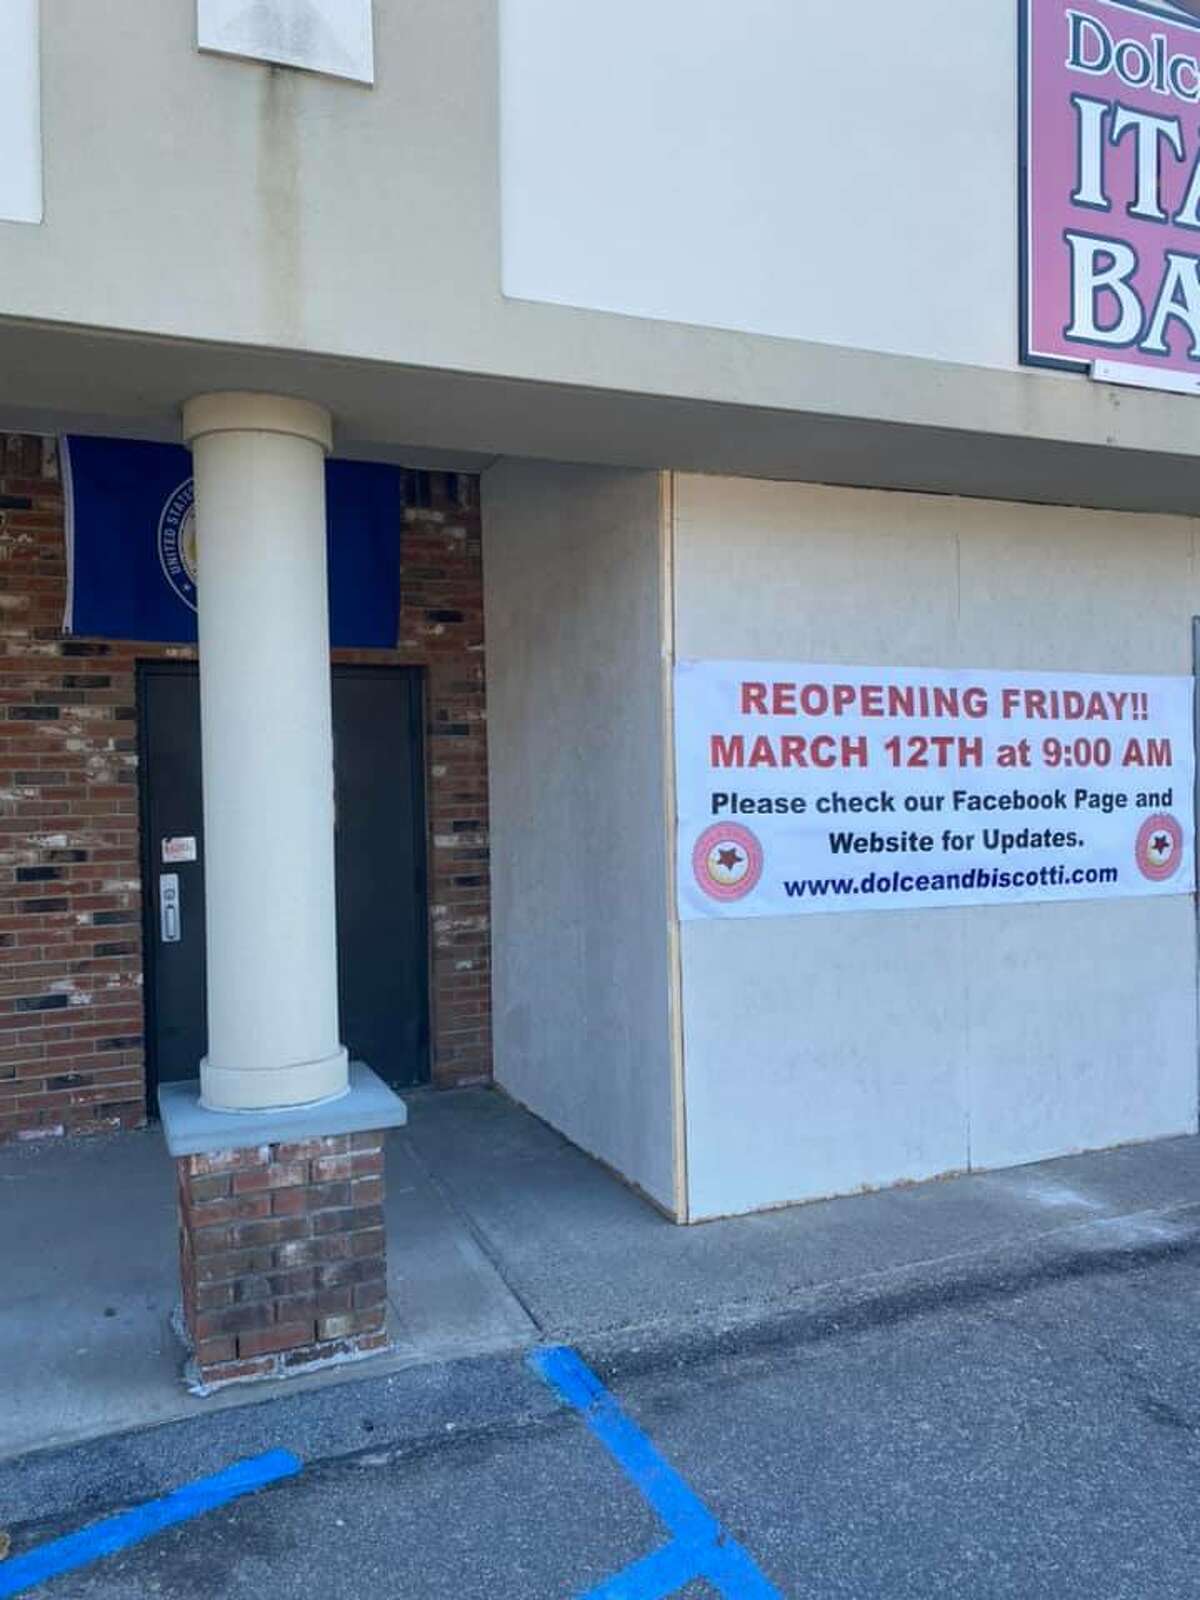 Less than two weeks after it reopened after a car slammed through its front window, Dolce & Biscotti Fine Italian Bakery was struck again by a car that careered into the support pole March 25, 2021, just feet from where the first crash happened.